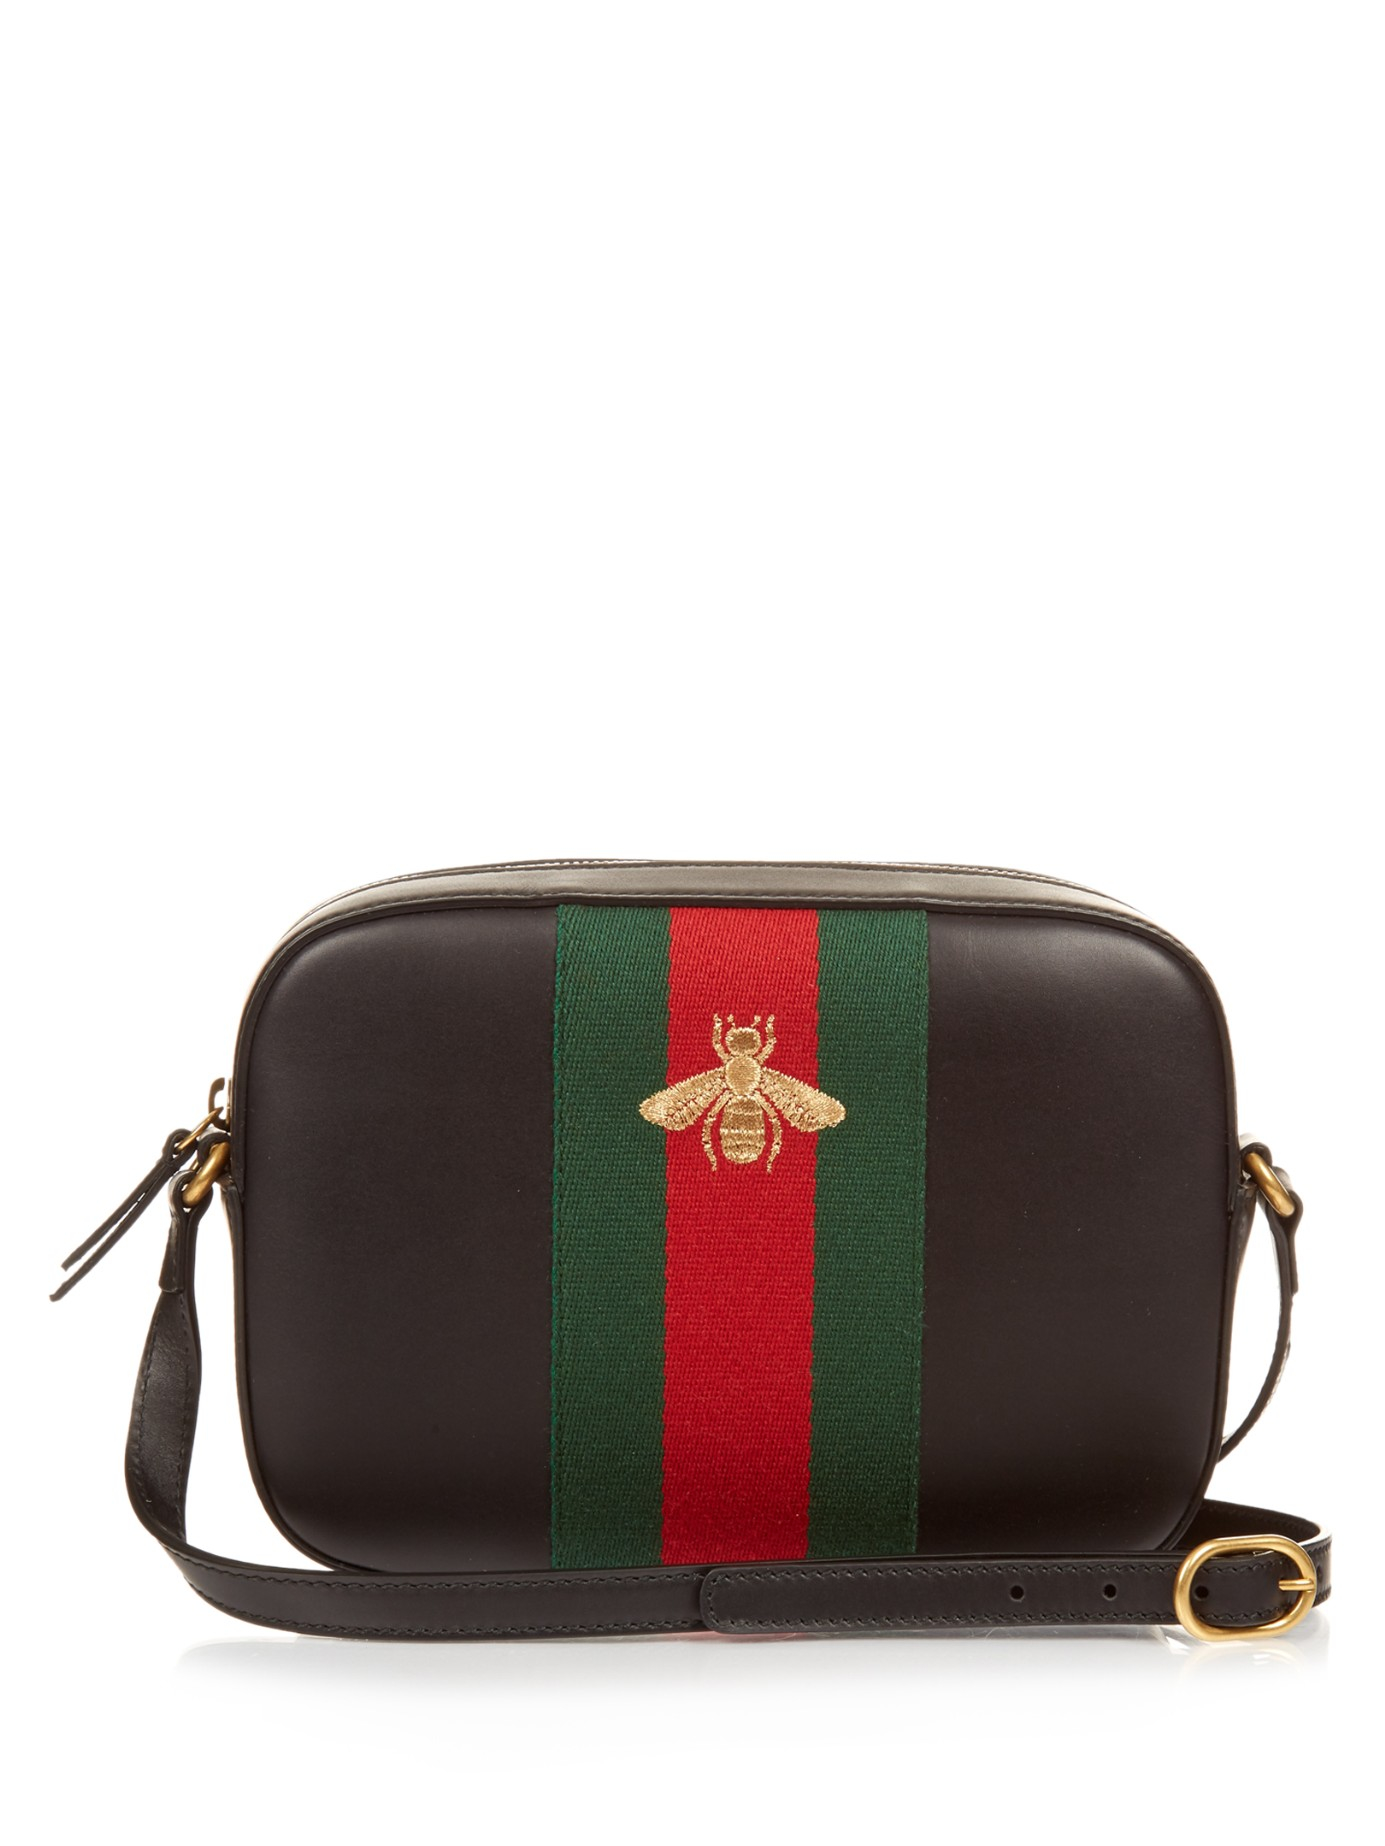 Gucci Line Bee-Embroidered Leather Cross-Body Bag in Brown